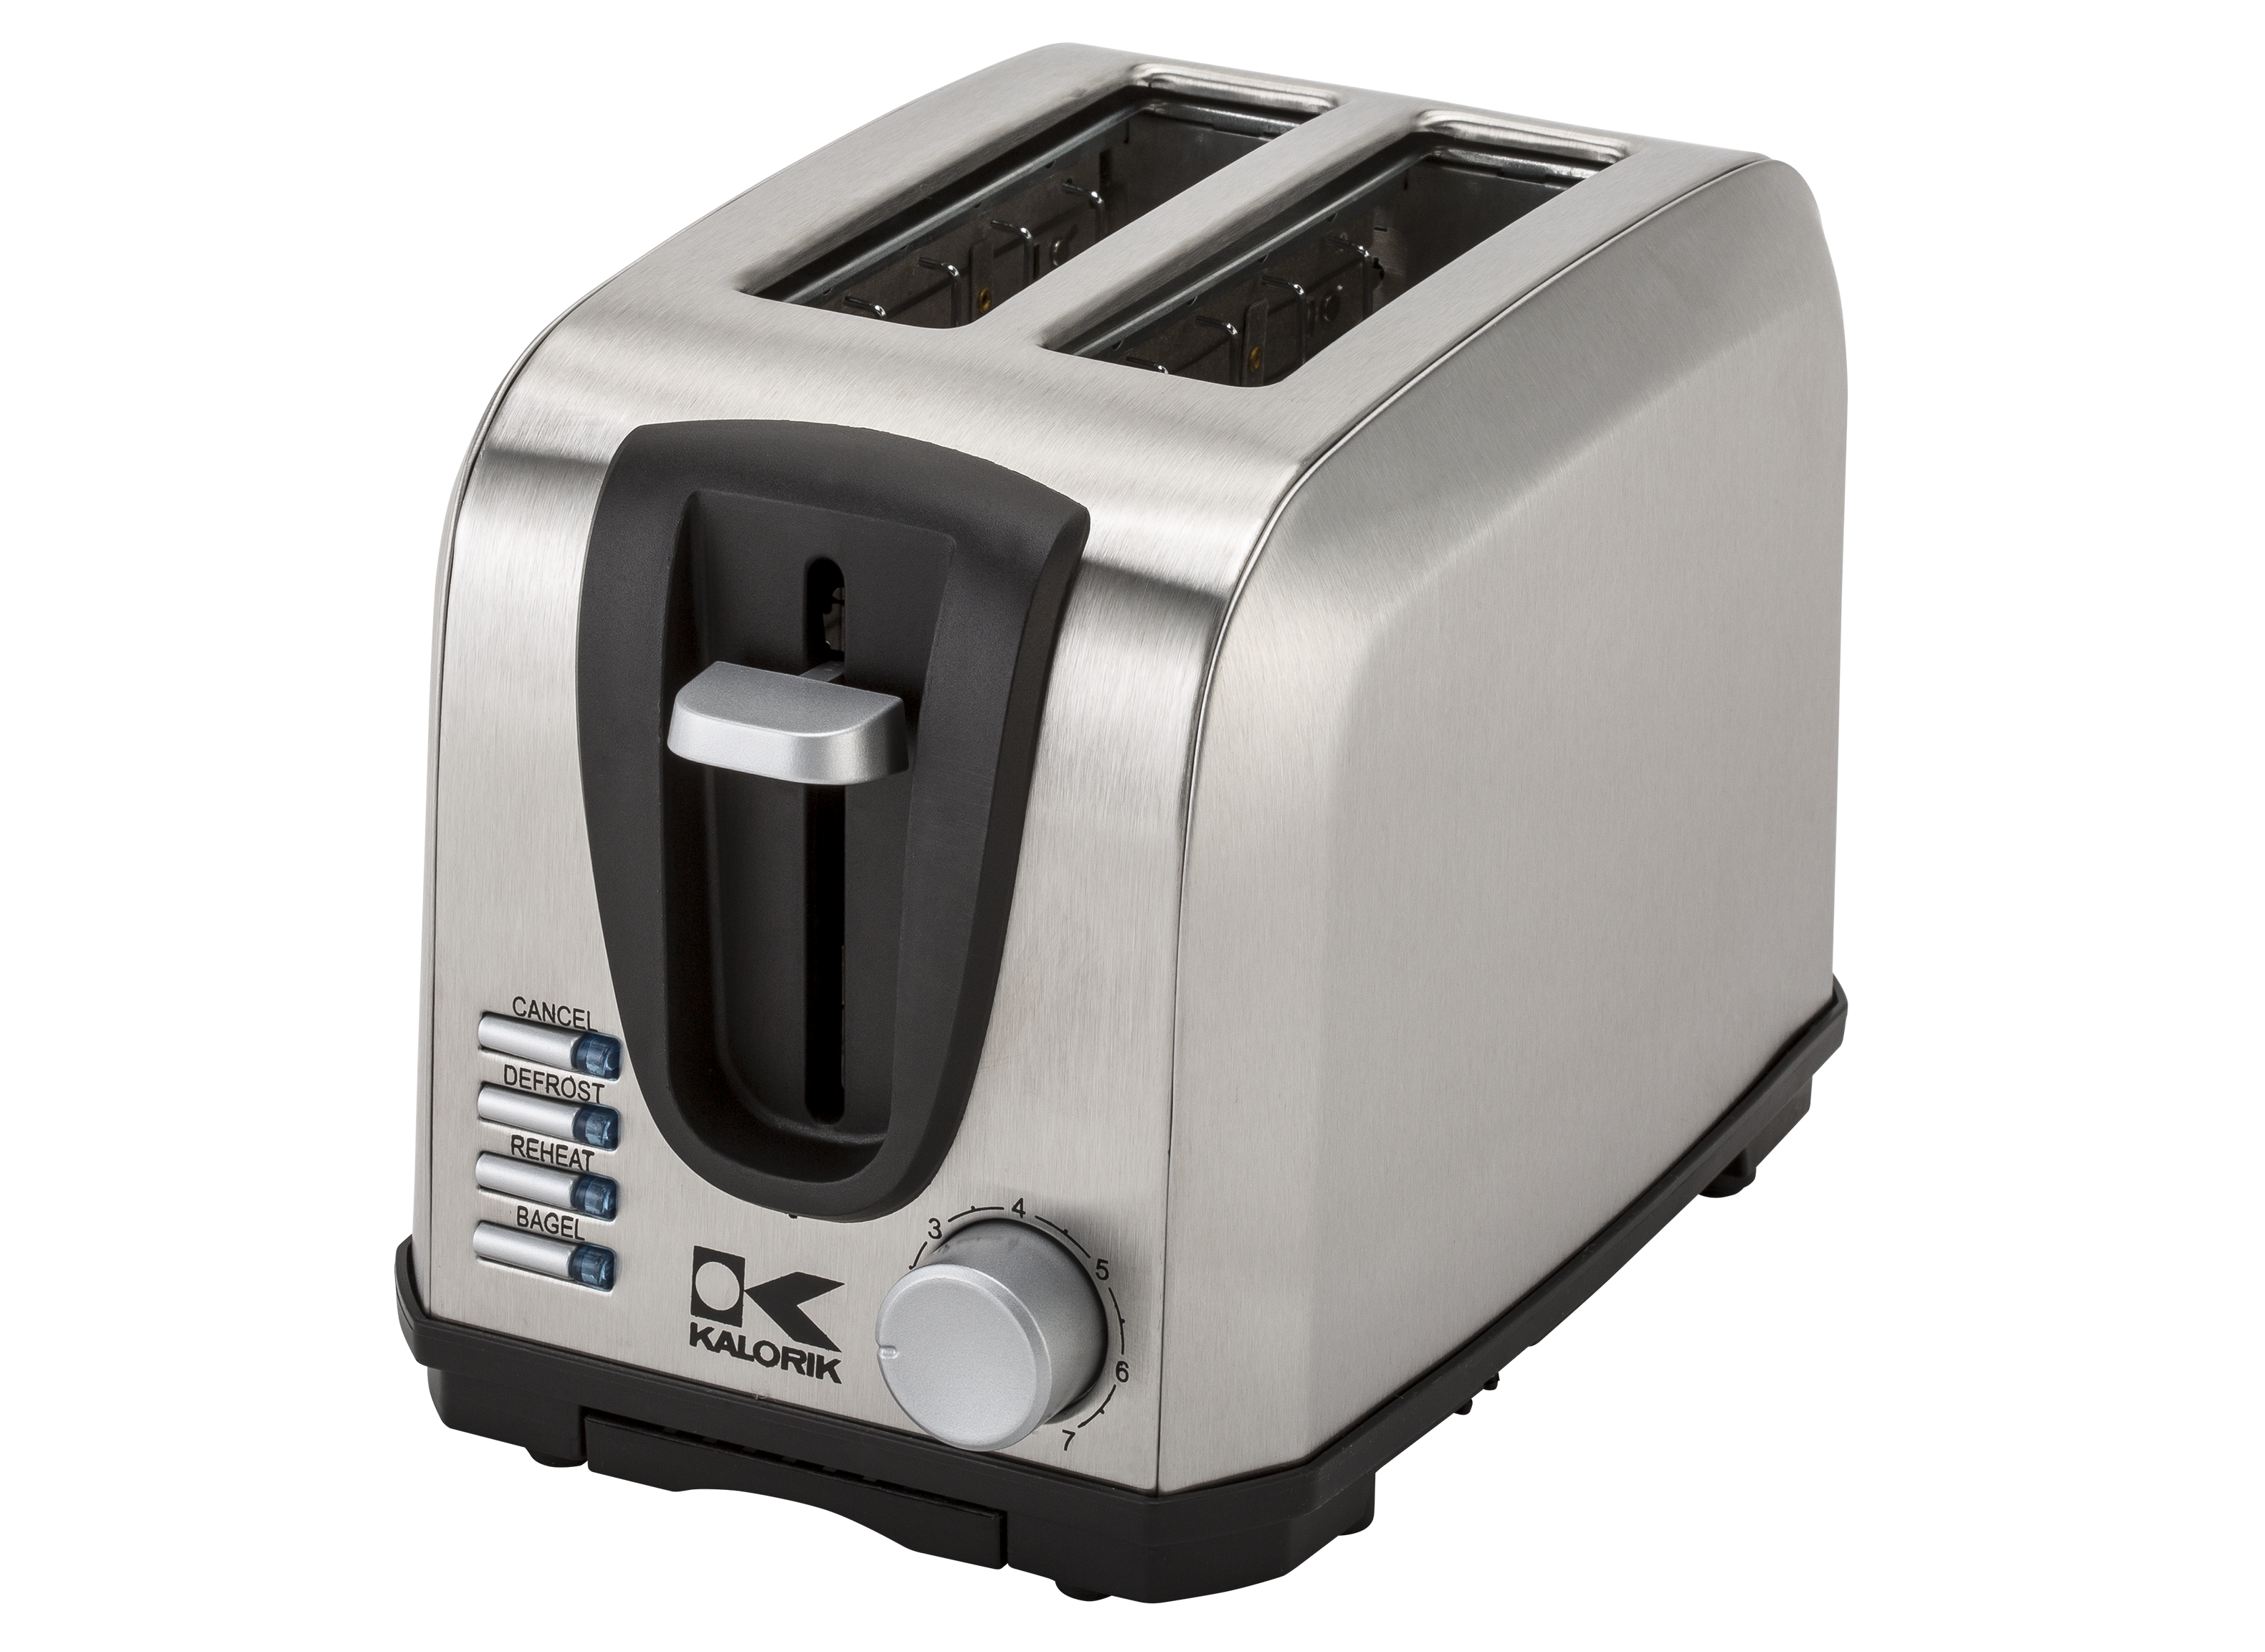 https://crdms.images.consumerreports.org/prod/products/cr/models/389610-toasters-kalorik-2sliceto37895ss.png